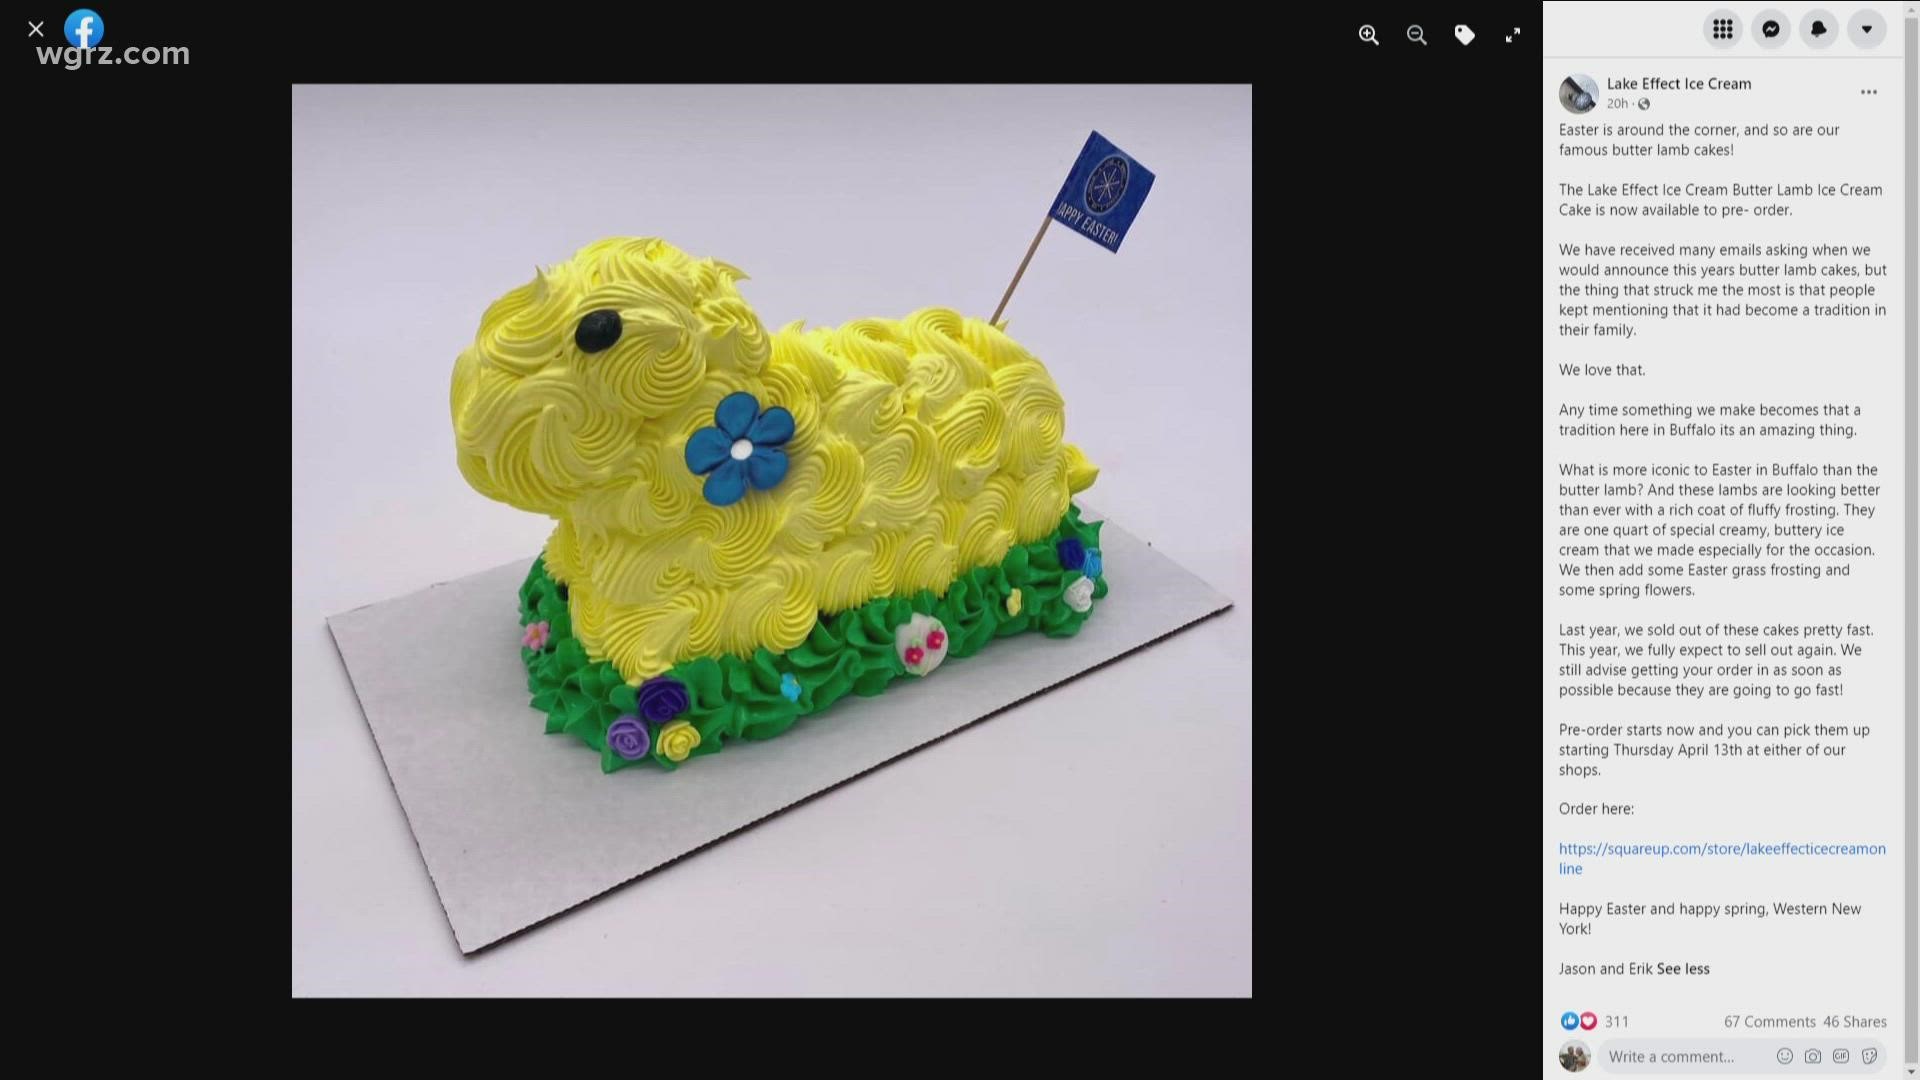 Butter Lamb ice cream cakes at Lake Effect